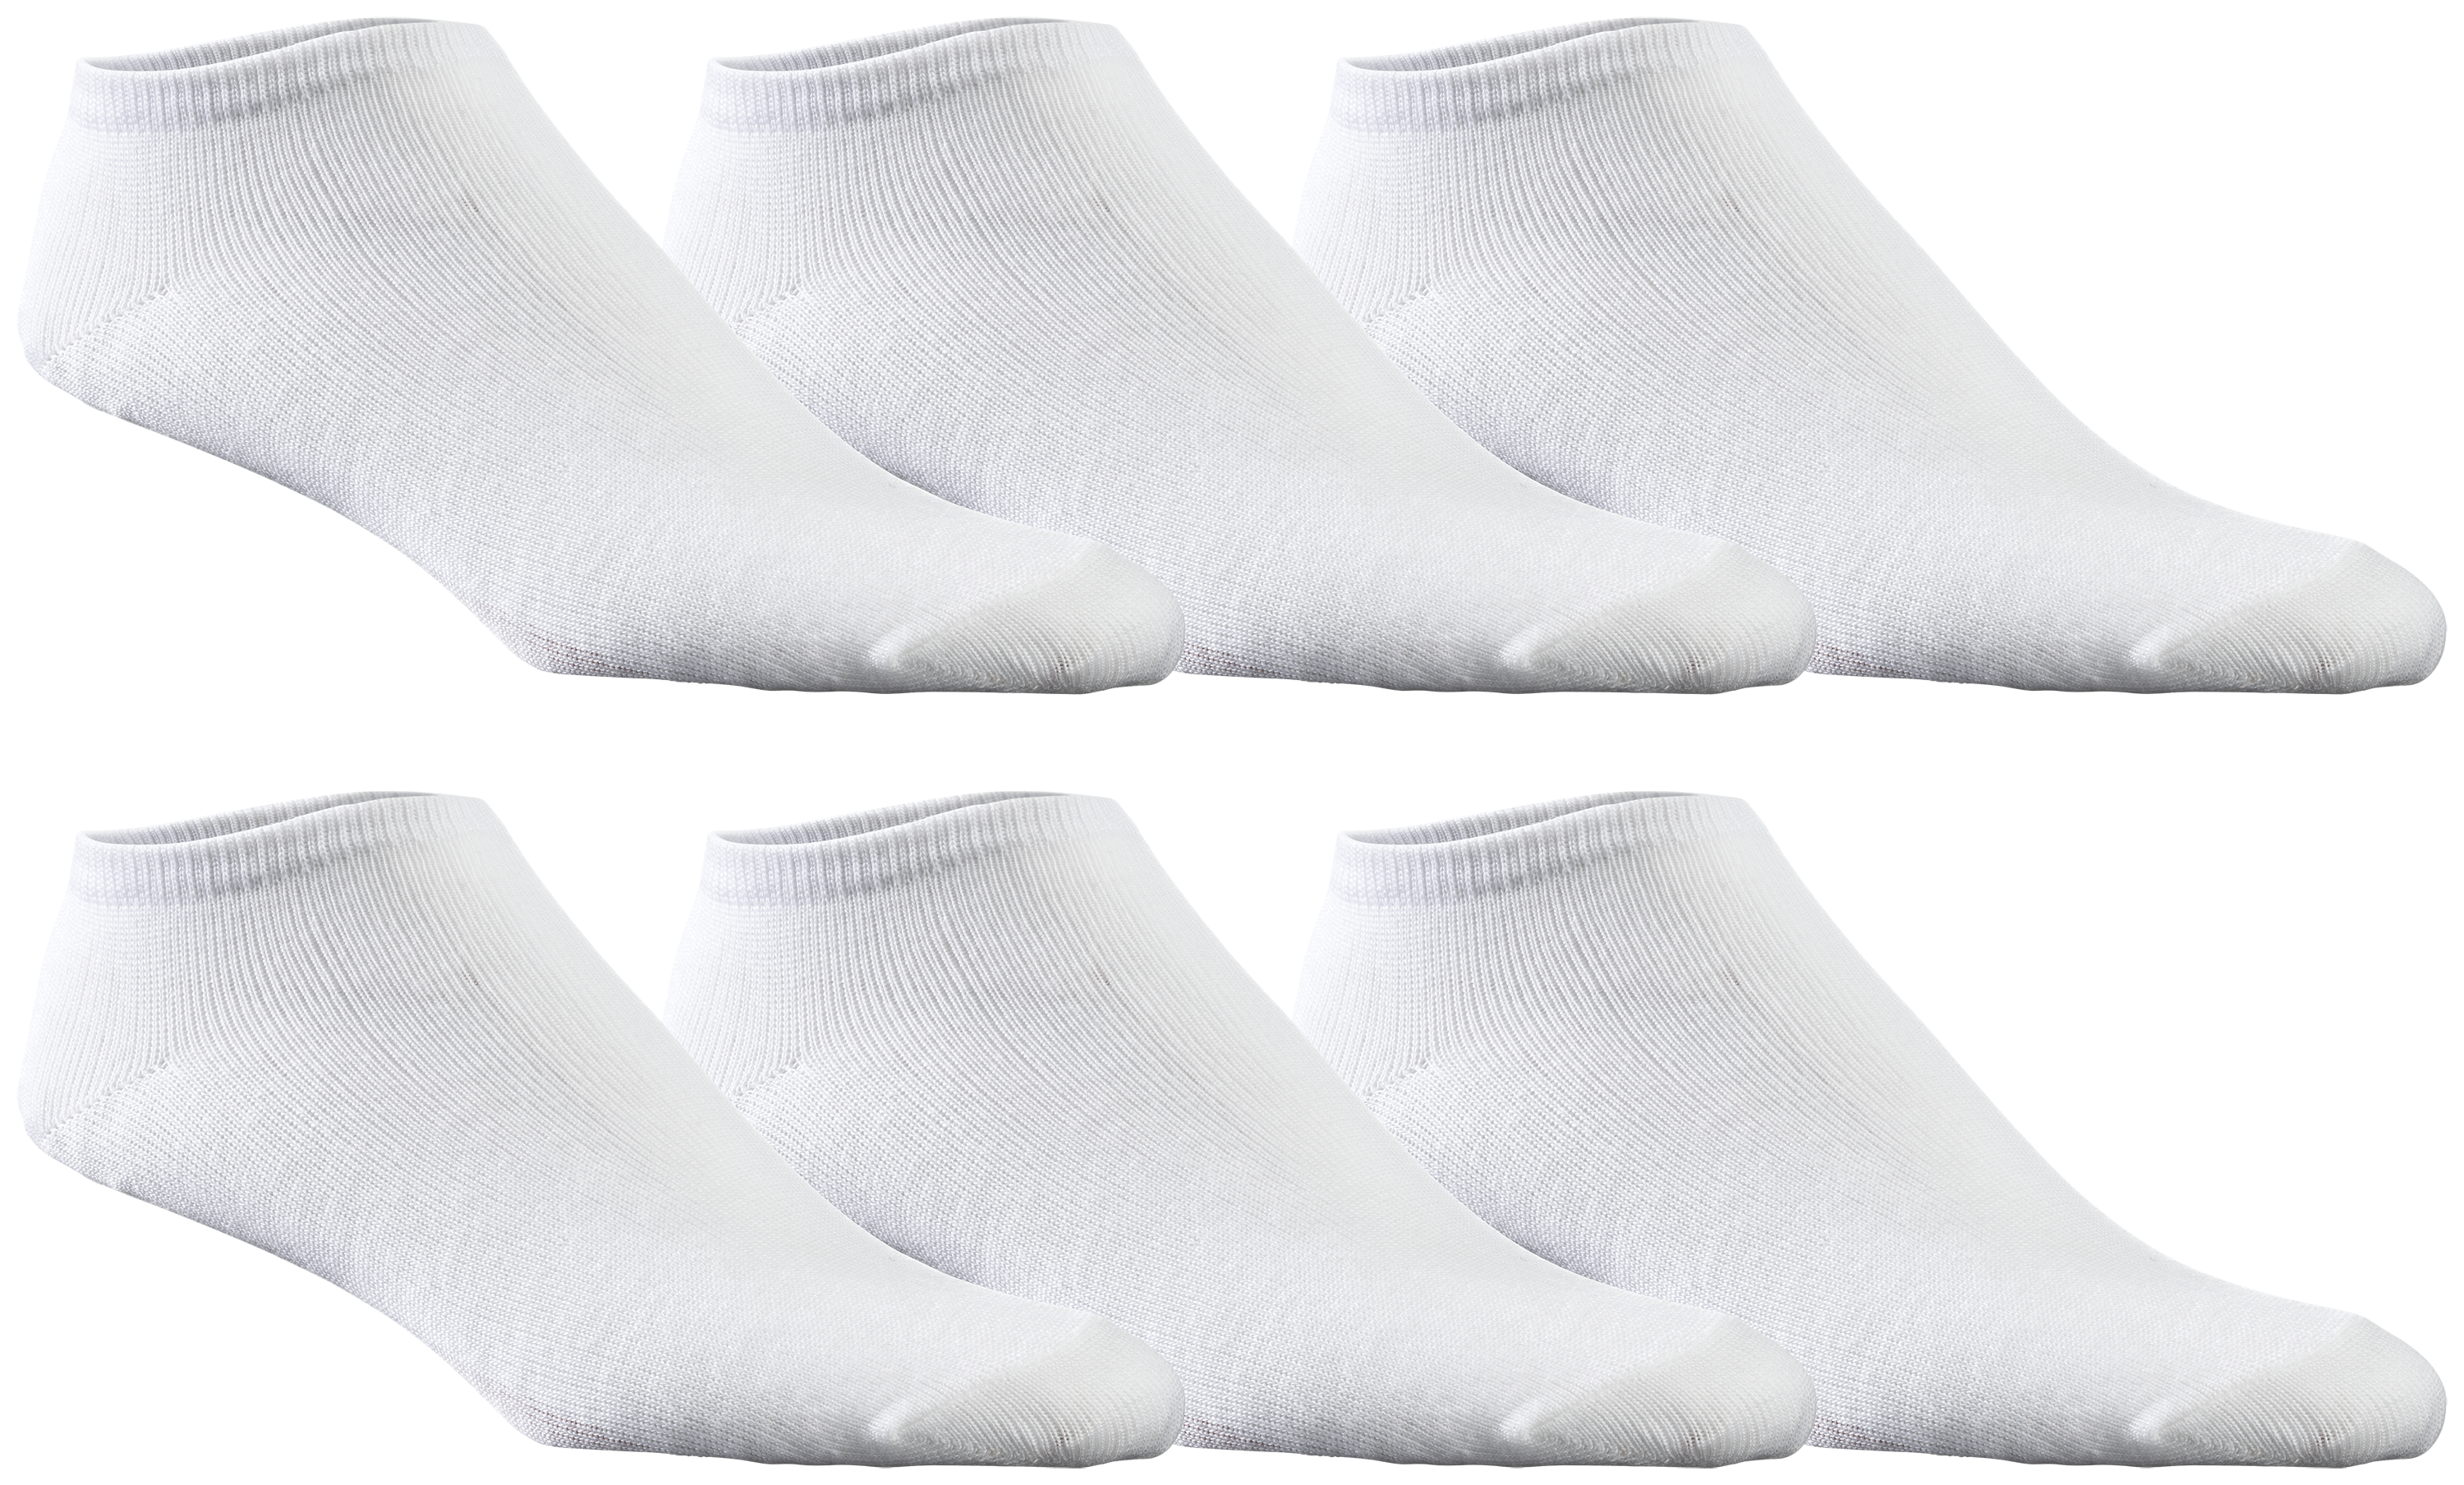 Natural Reflections Heavyweight Thermal Socks for Ladies 2-Pair